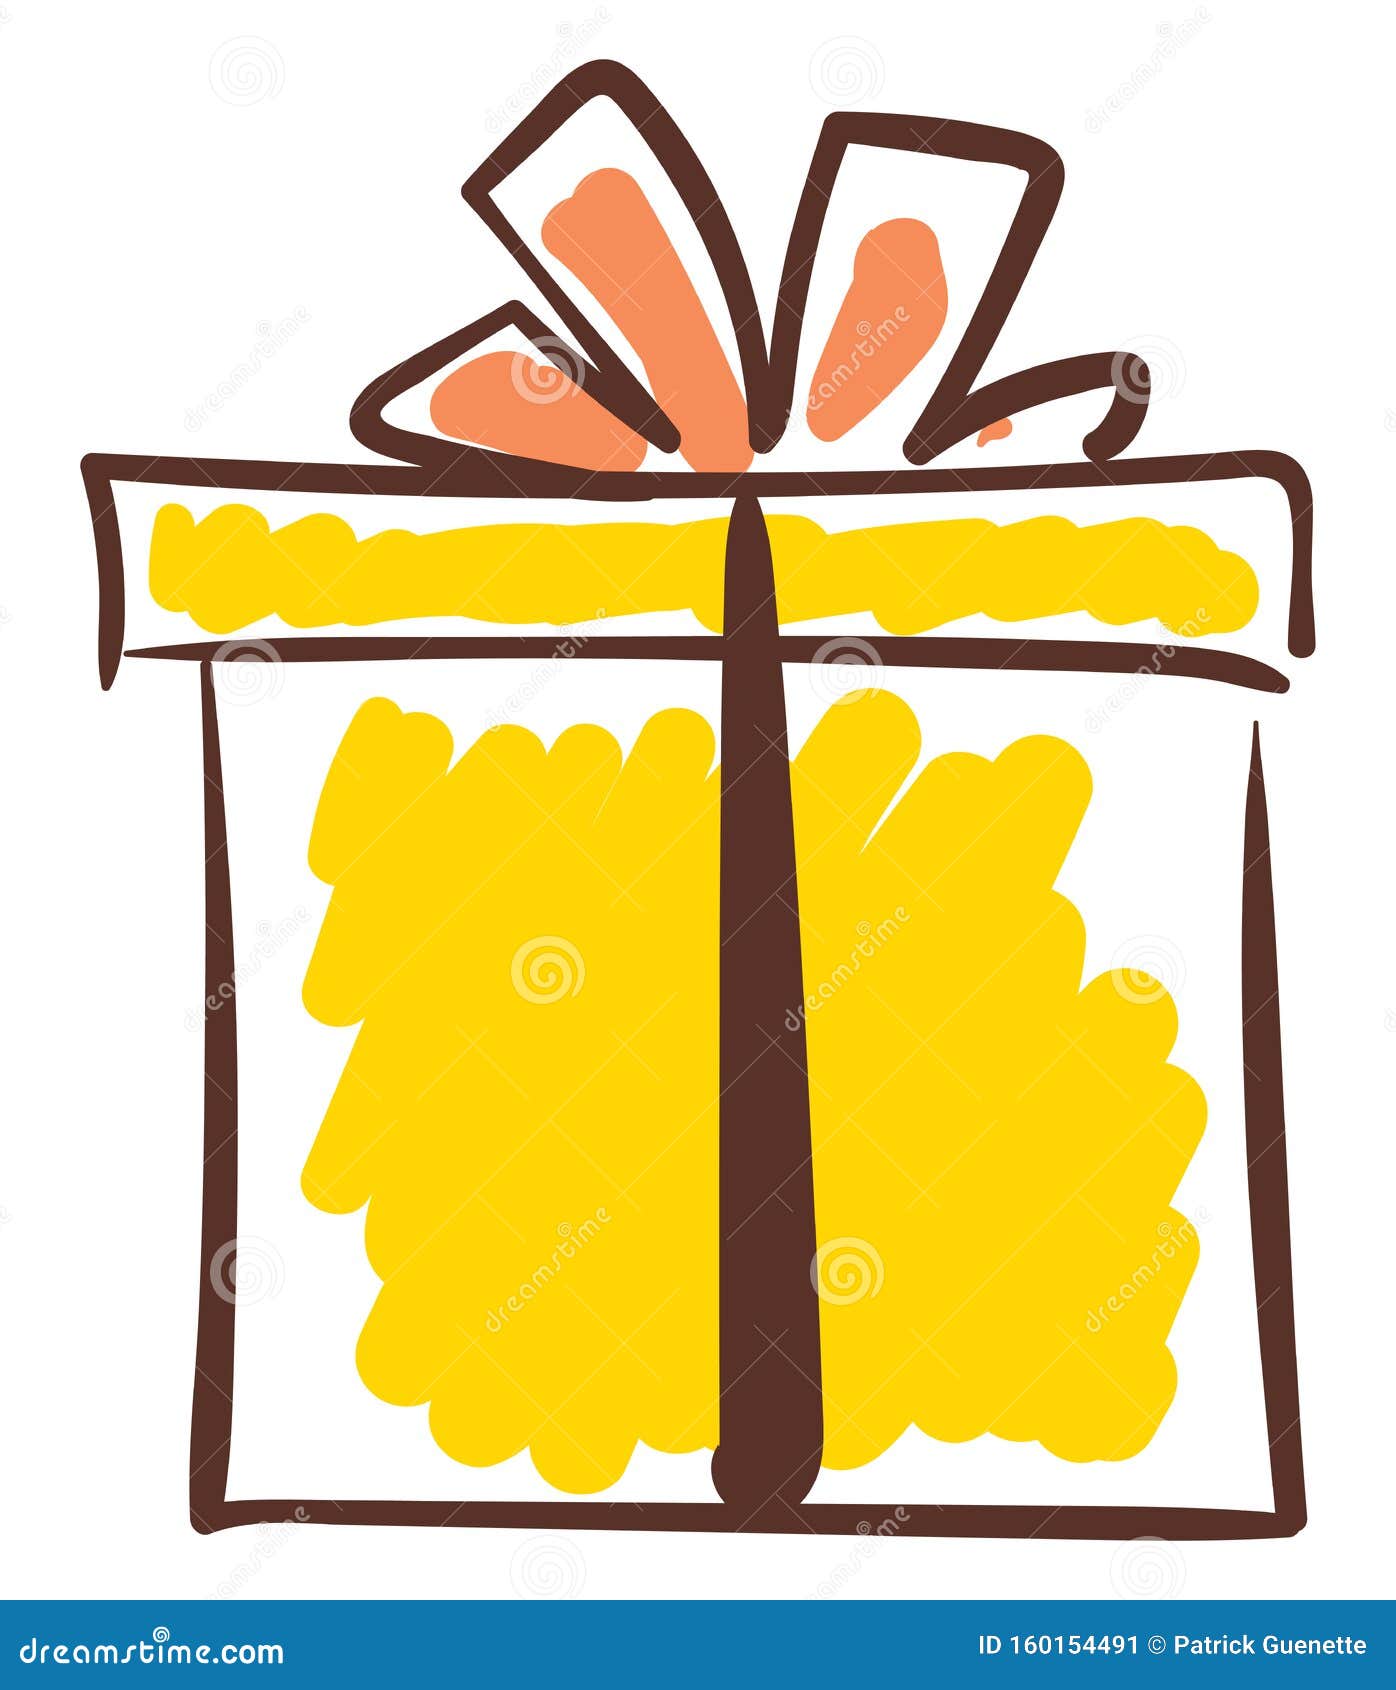 https://thumbs.dreamstime.com/z/sketch-yellow-colored-gift-box-tied-black-ribbon-topped-red-bow-works-well-as-presents-special-days-vector-160154491.jpg